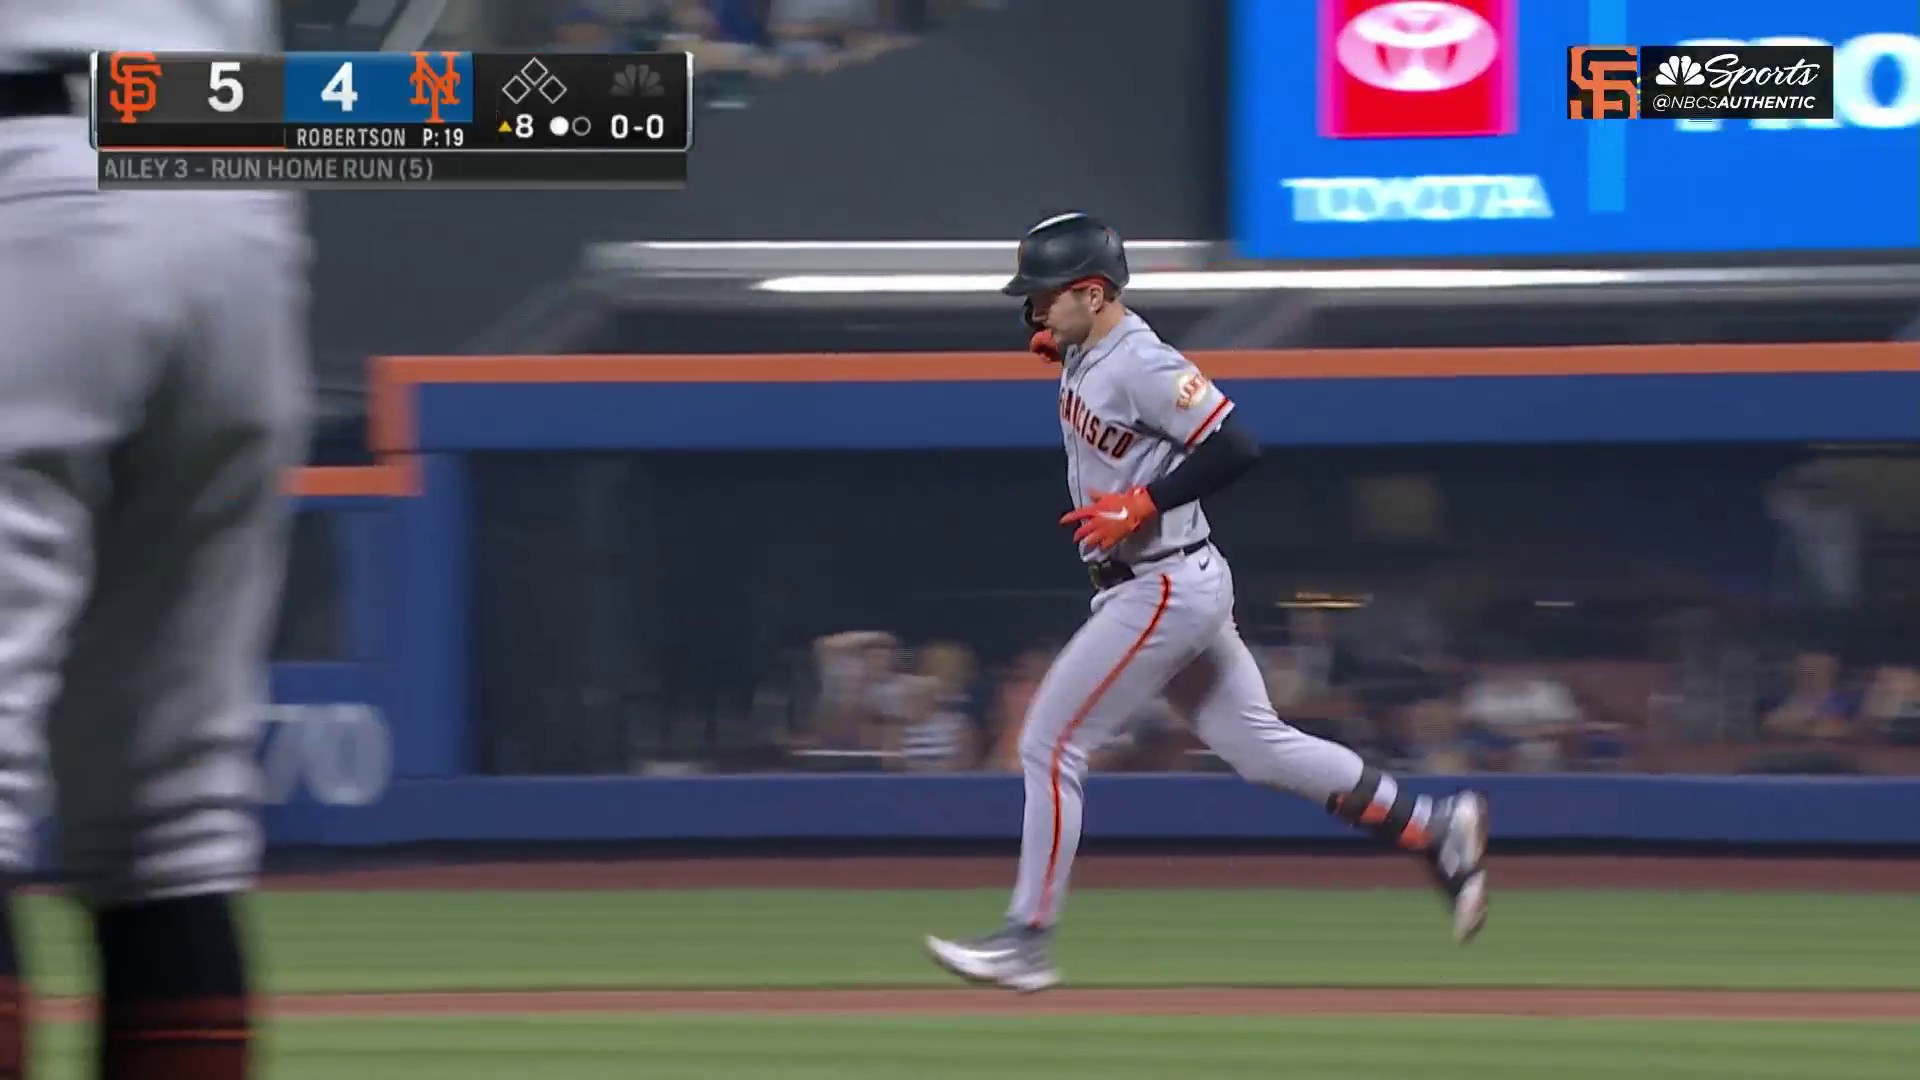 Yastrzemski splashes 3-run HR into McCovey Cove in the 10th as the Giants  rally past the Padres 7-4